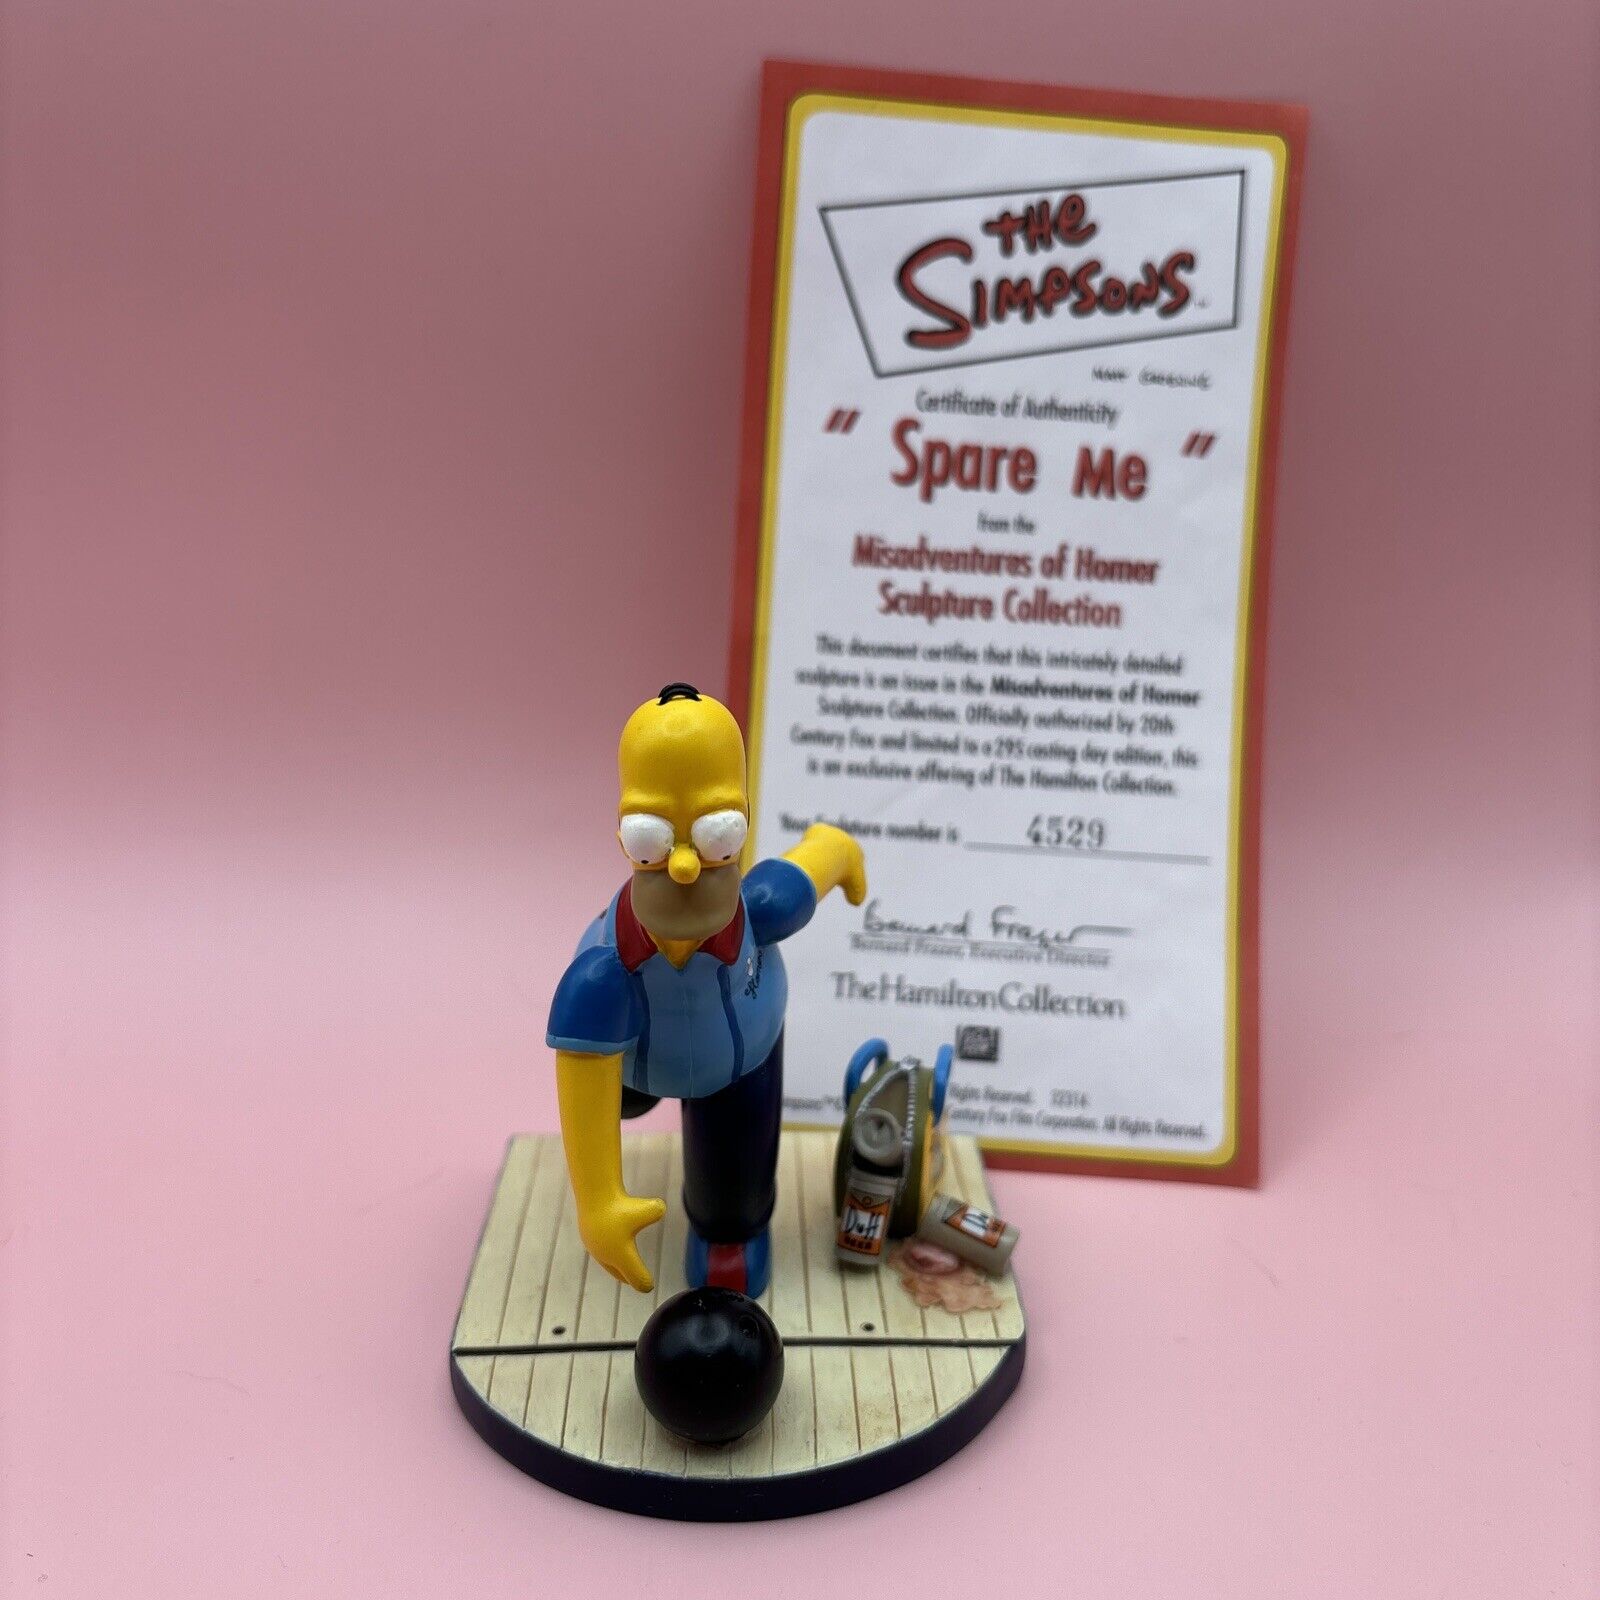 The Simpsons, Misadventures of Homer: “Spare me” Hamilton Collection COA